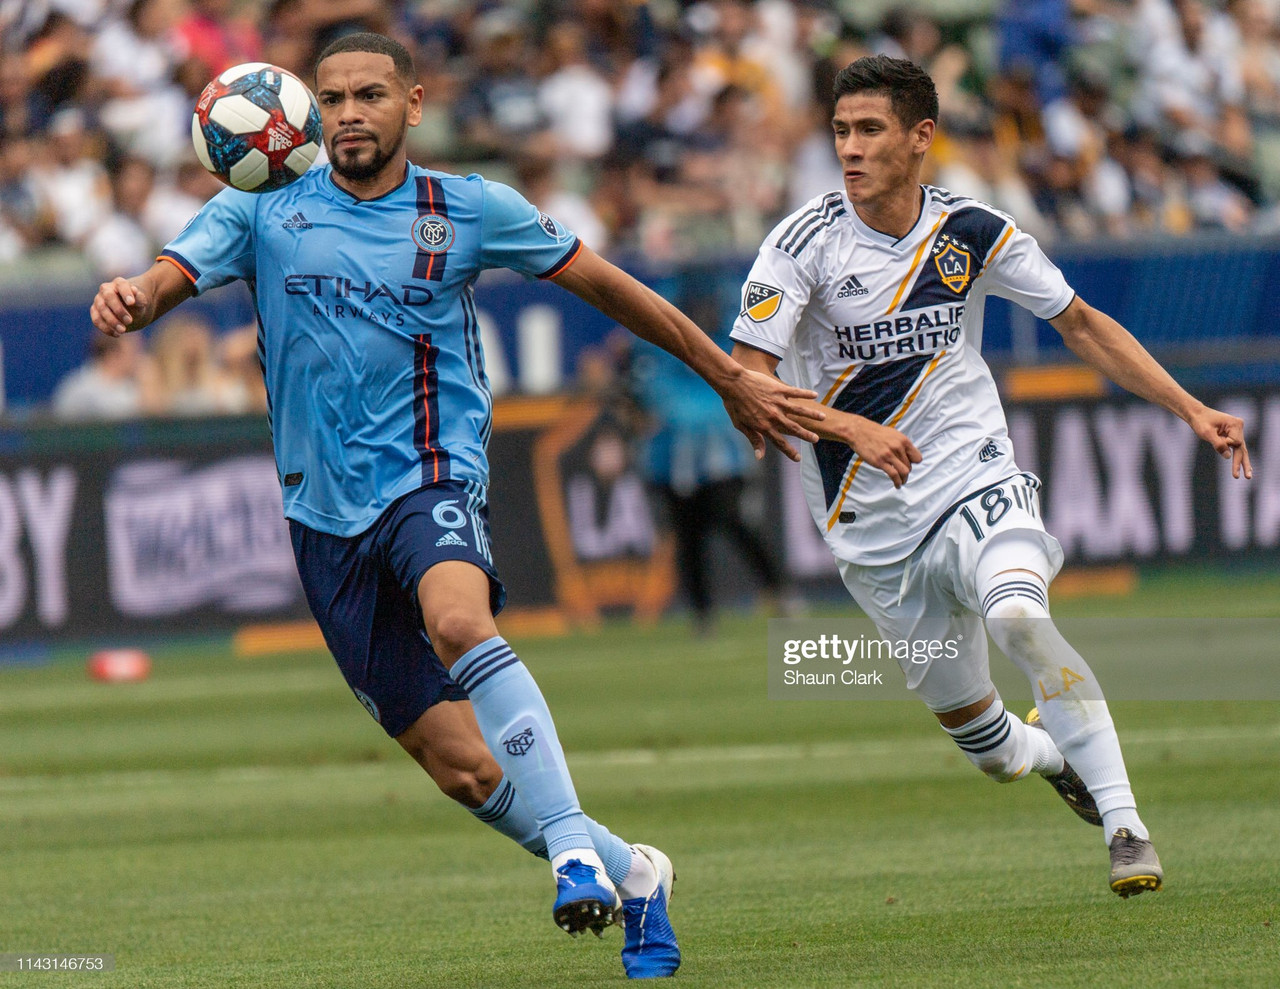 Los Angeles Galaxy vs NYCFC preview: How to watch, team news, predicted lineups, kickoff time and ones to watch